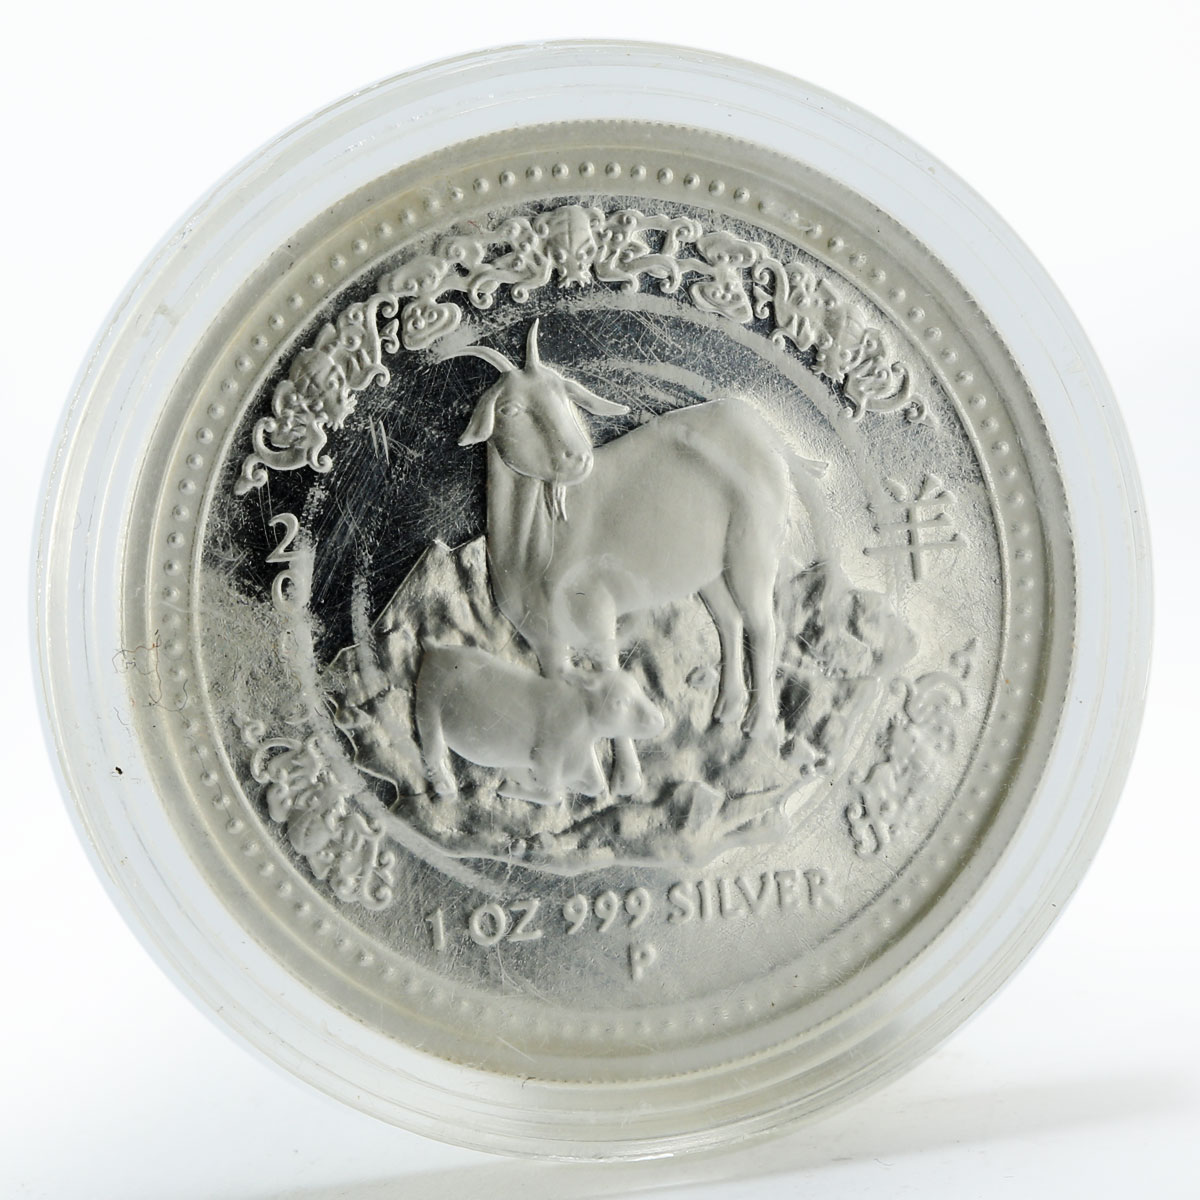 Australia 1 dollar Year of The Goat Lunar Series I proof silver coin 2003